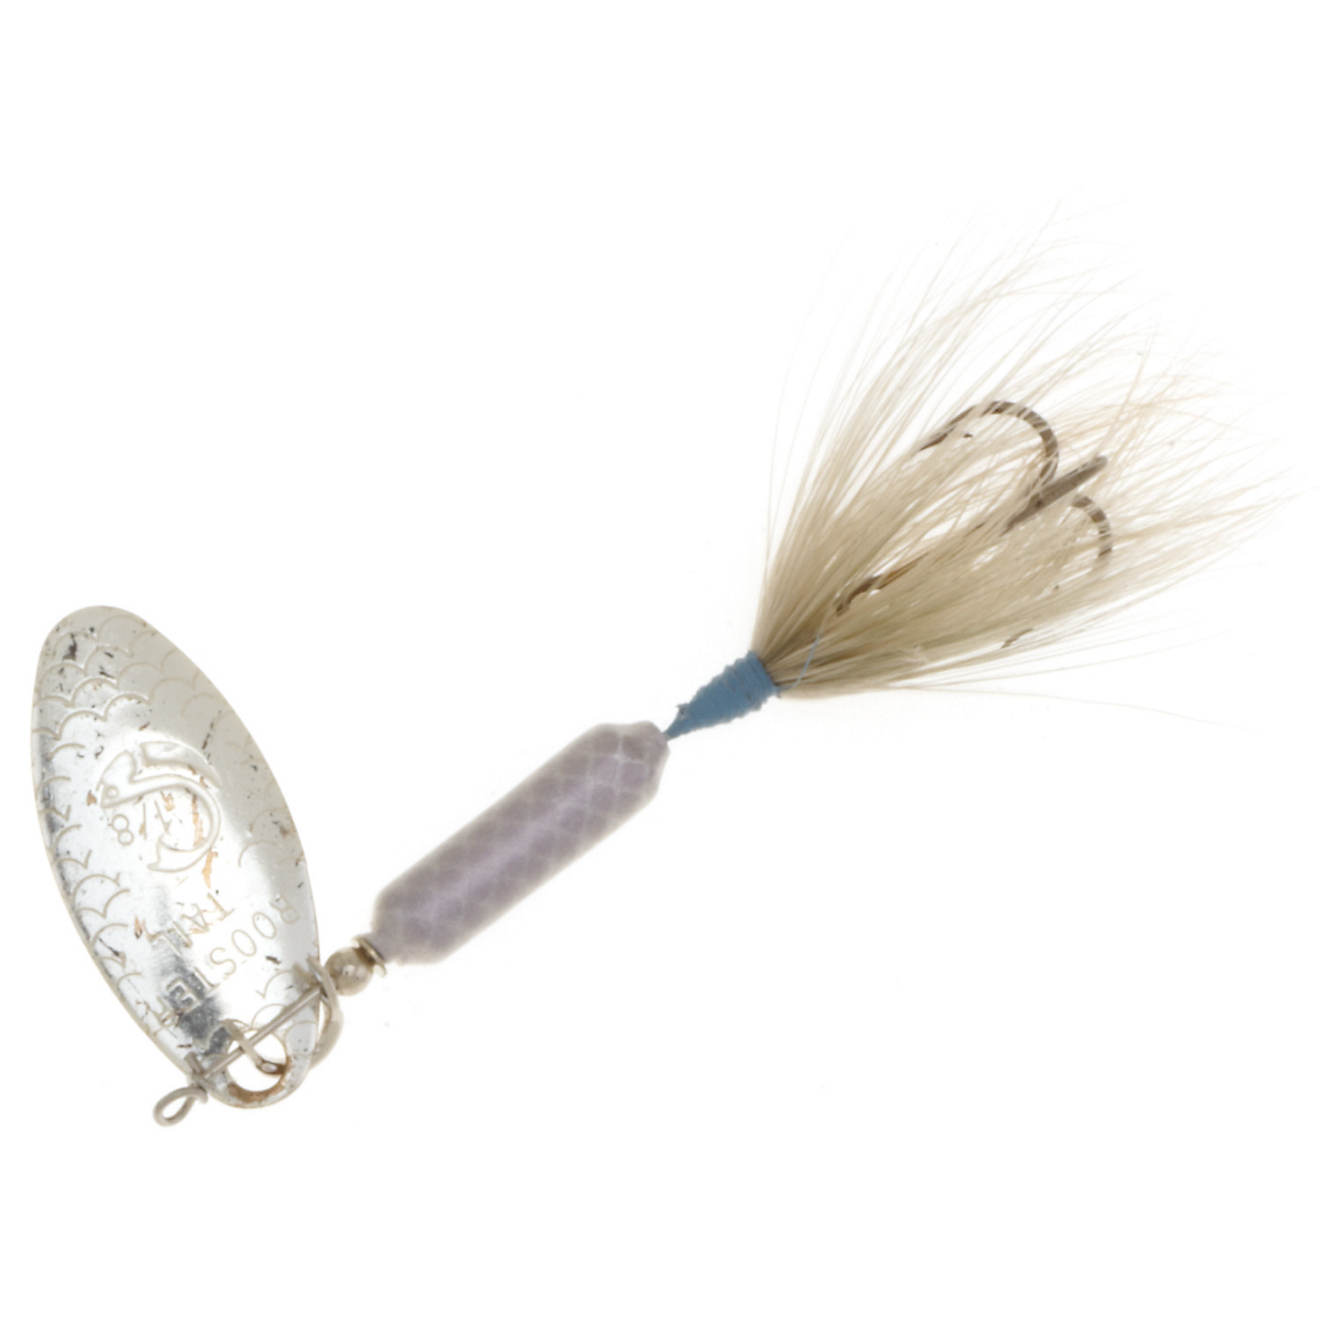 Worden's Rooster Tail 1/8 oz In-Line Spinner                                                                                     - view number 1